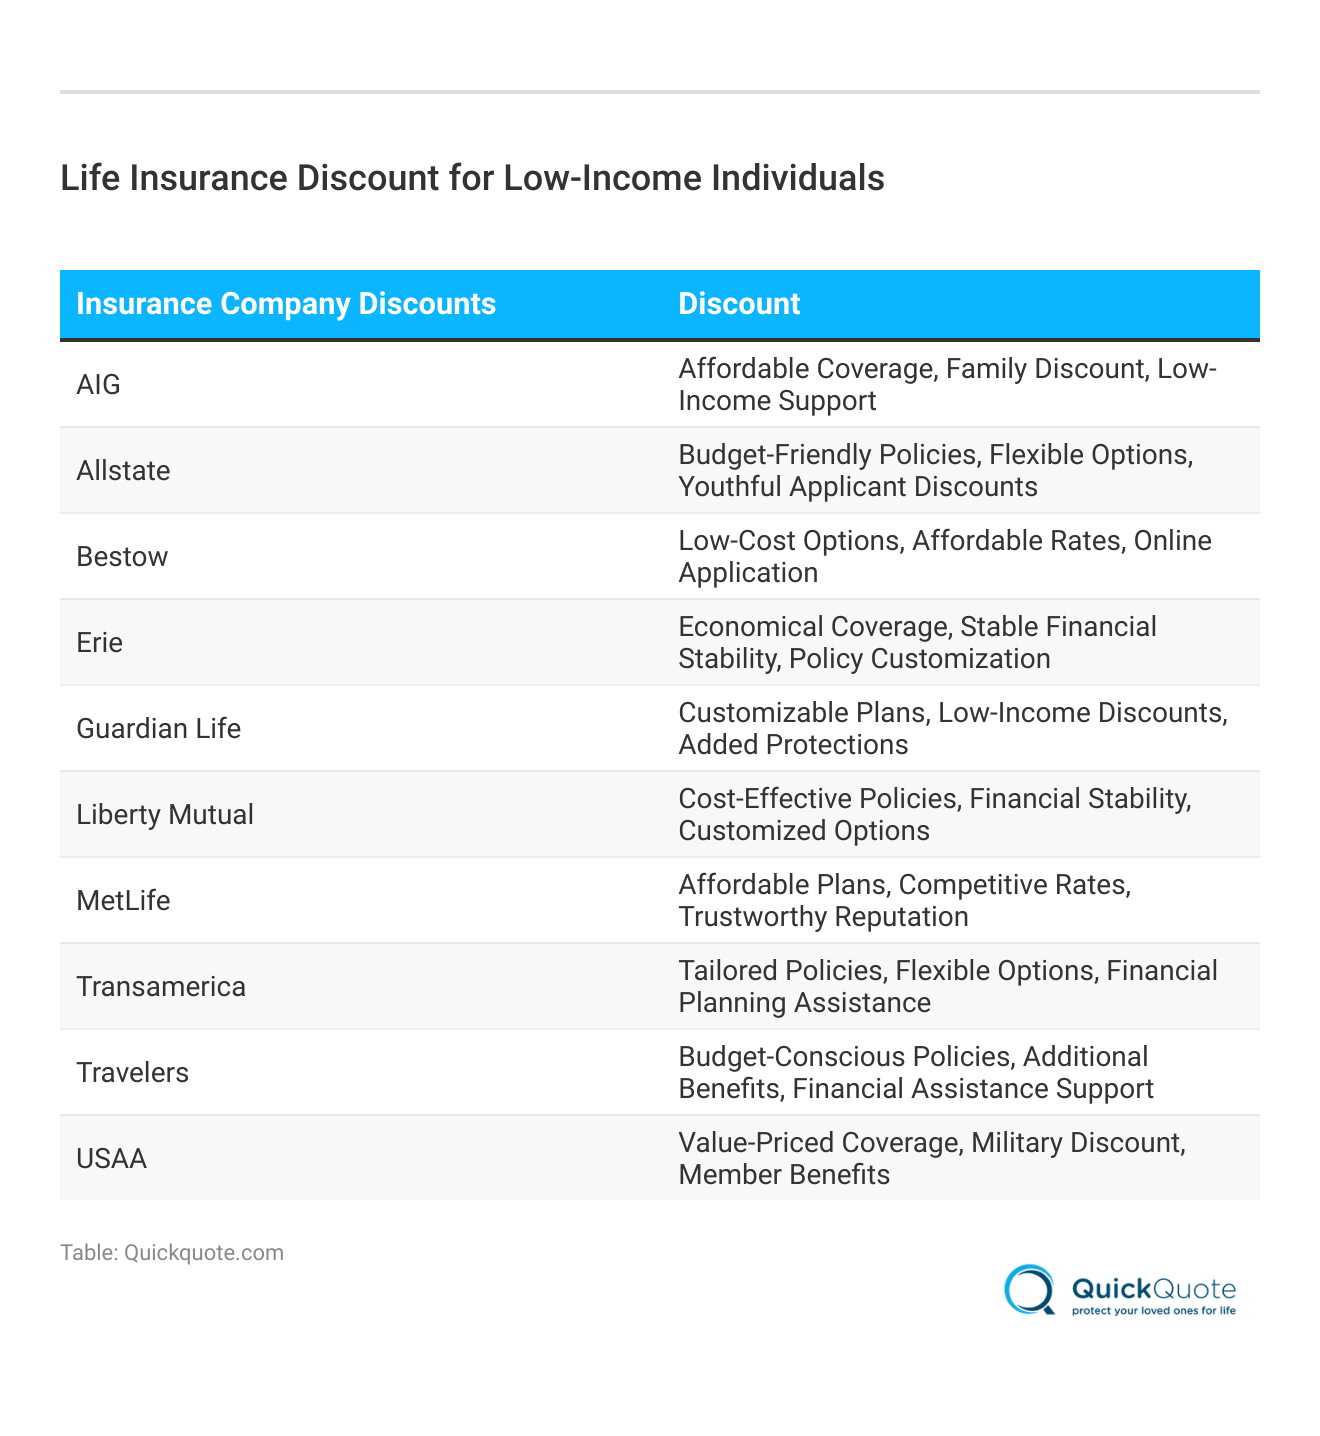 <h3>Life Insurance Discount for Low-Income Individuals</h3>